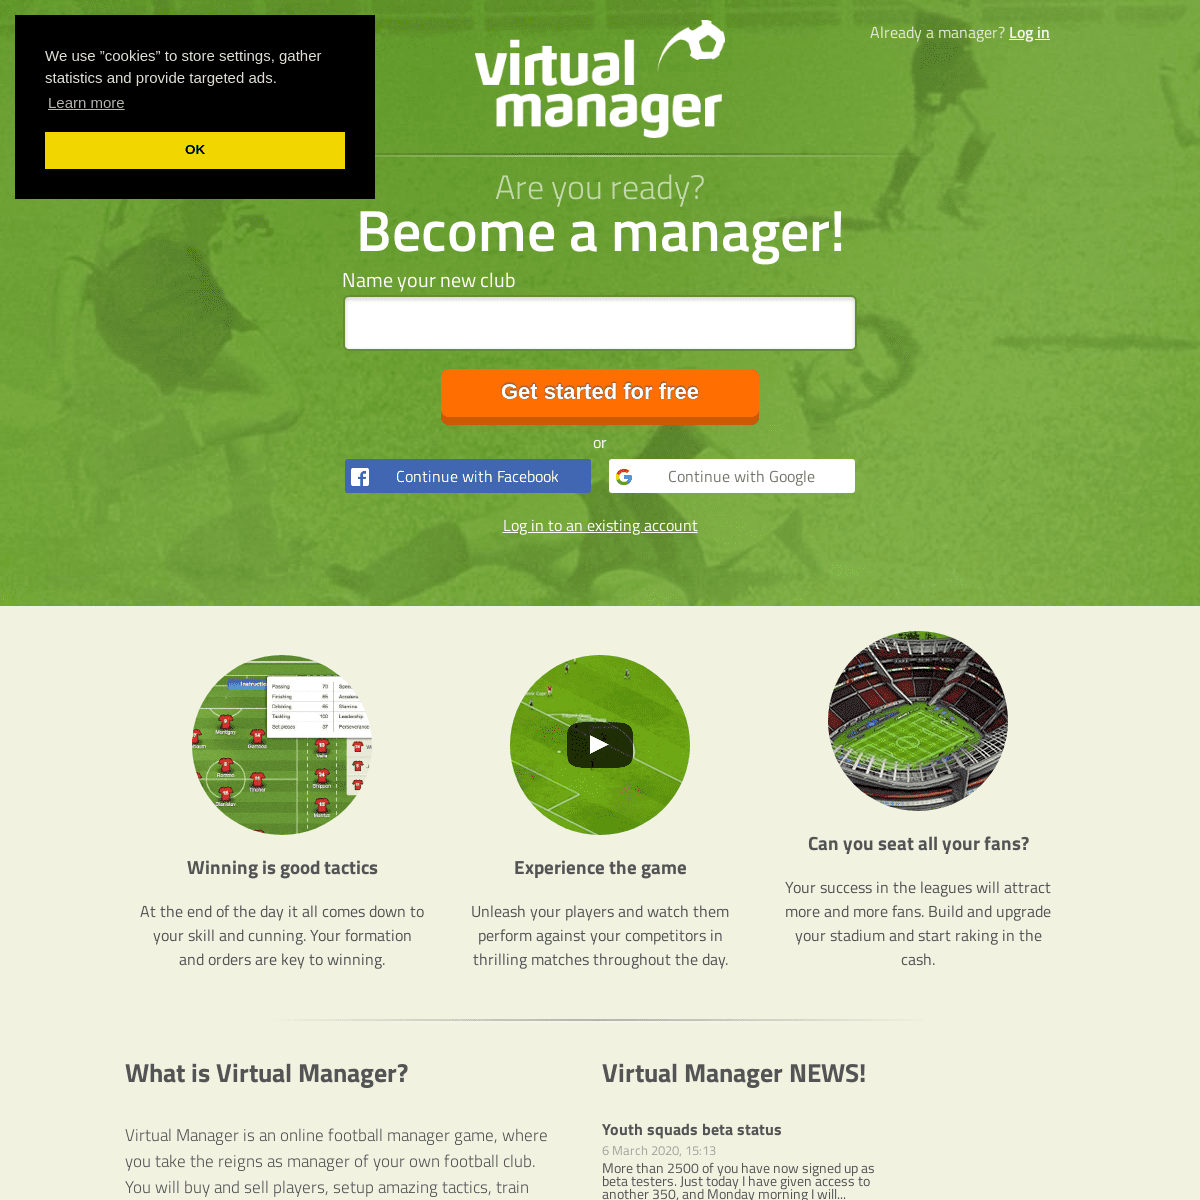 A complete backup of virtualmanager.com